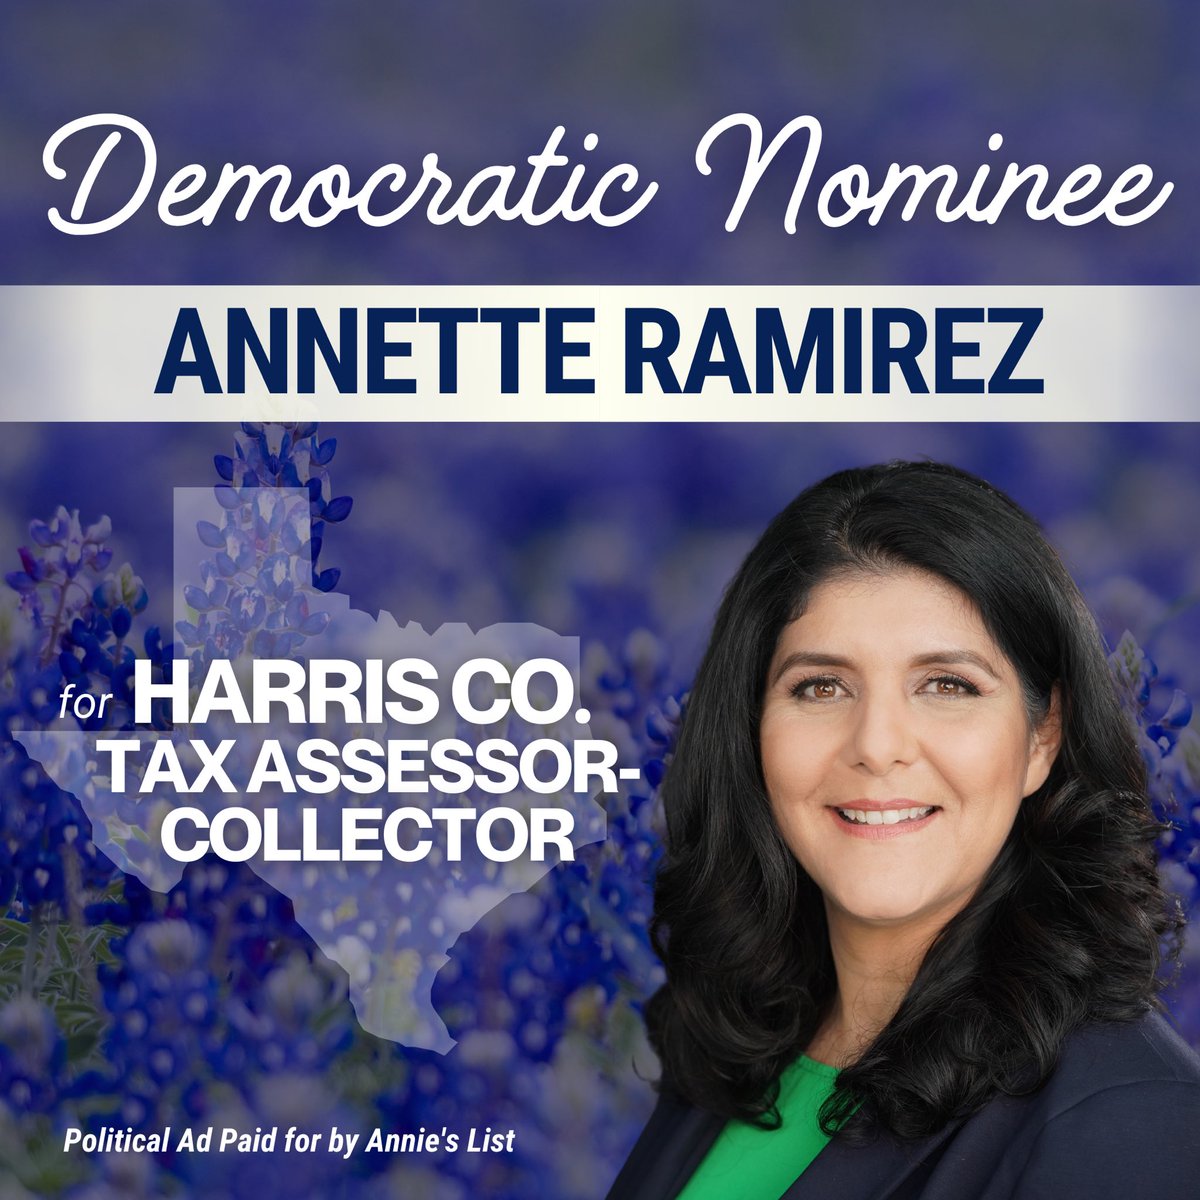 Congratulations to Democratic Nominee for Harris Co. Tax Assessor-Collector, @ElectAnnetteR!

Women are making a difference at all levels of government in Texas. 💪